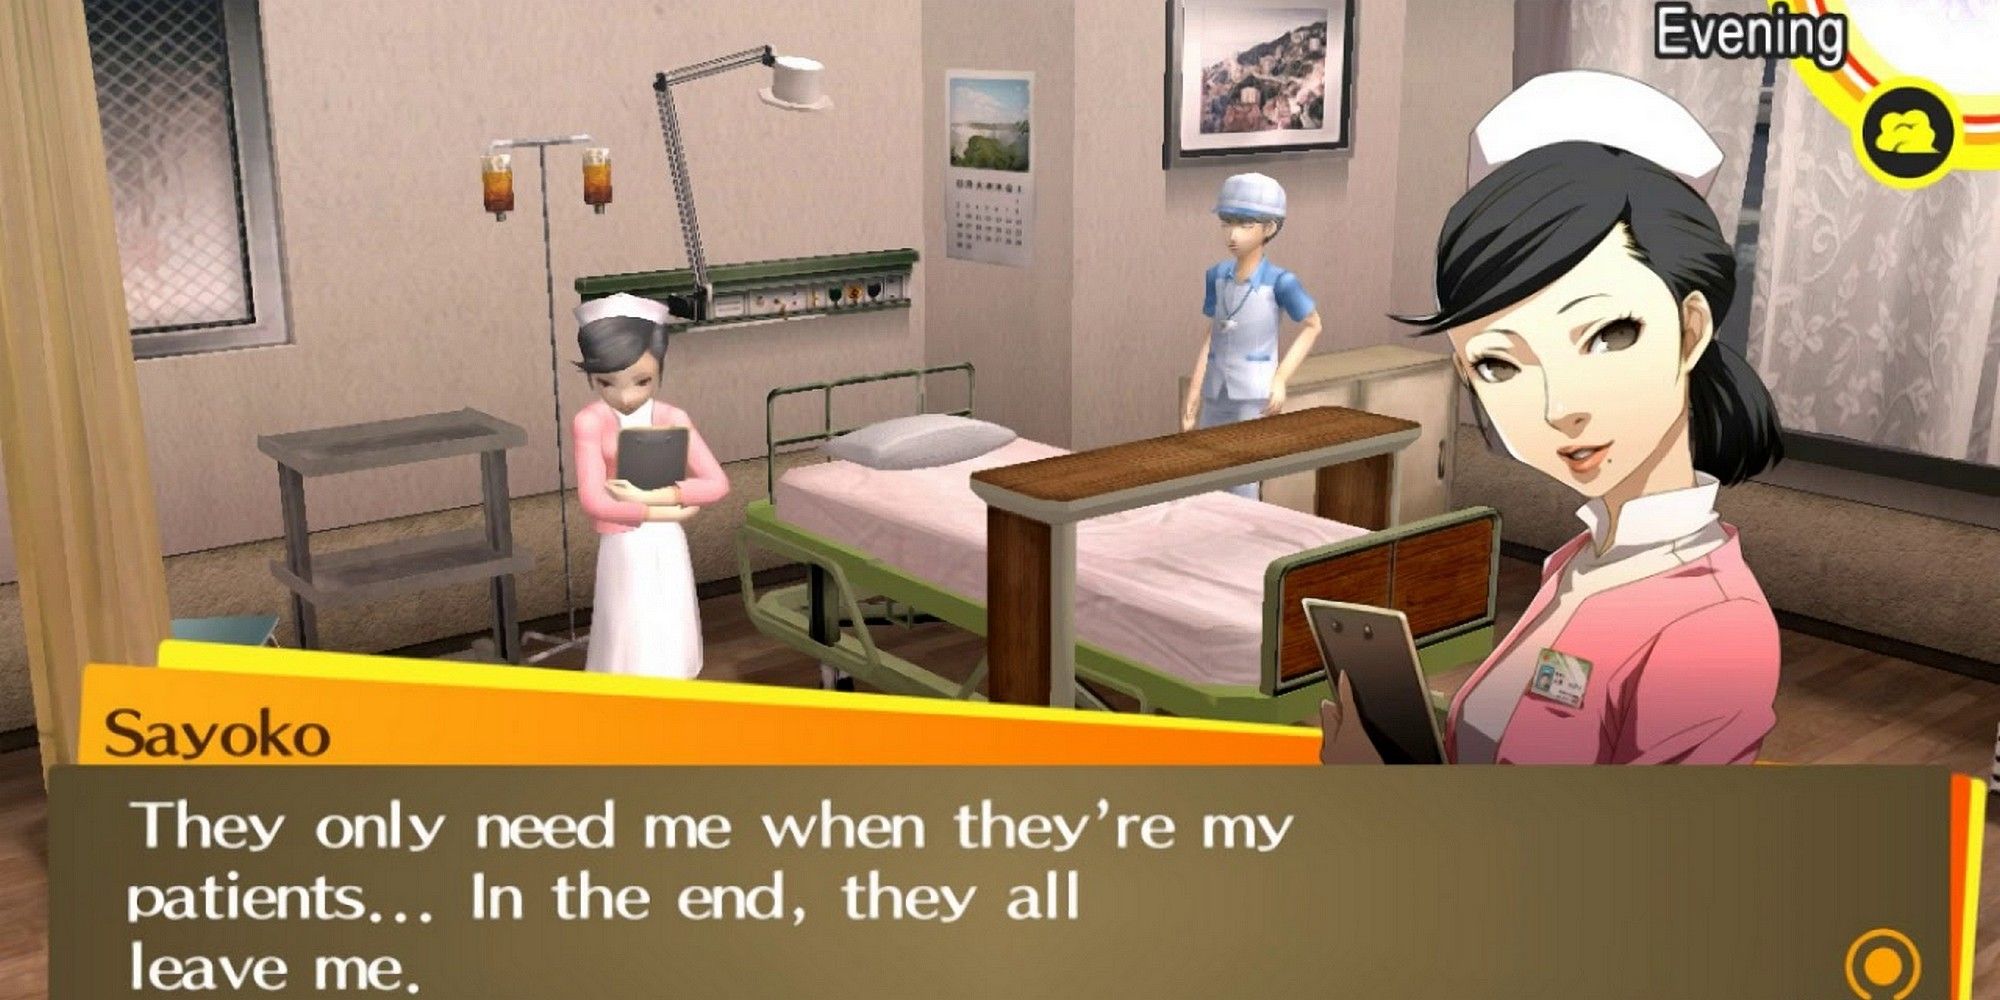 yu and sayoko at the hospital in persona 4 golden, talking about patients leaving